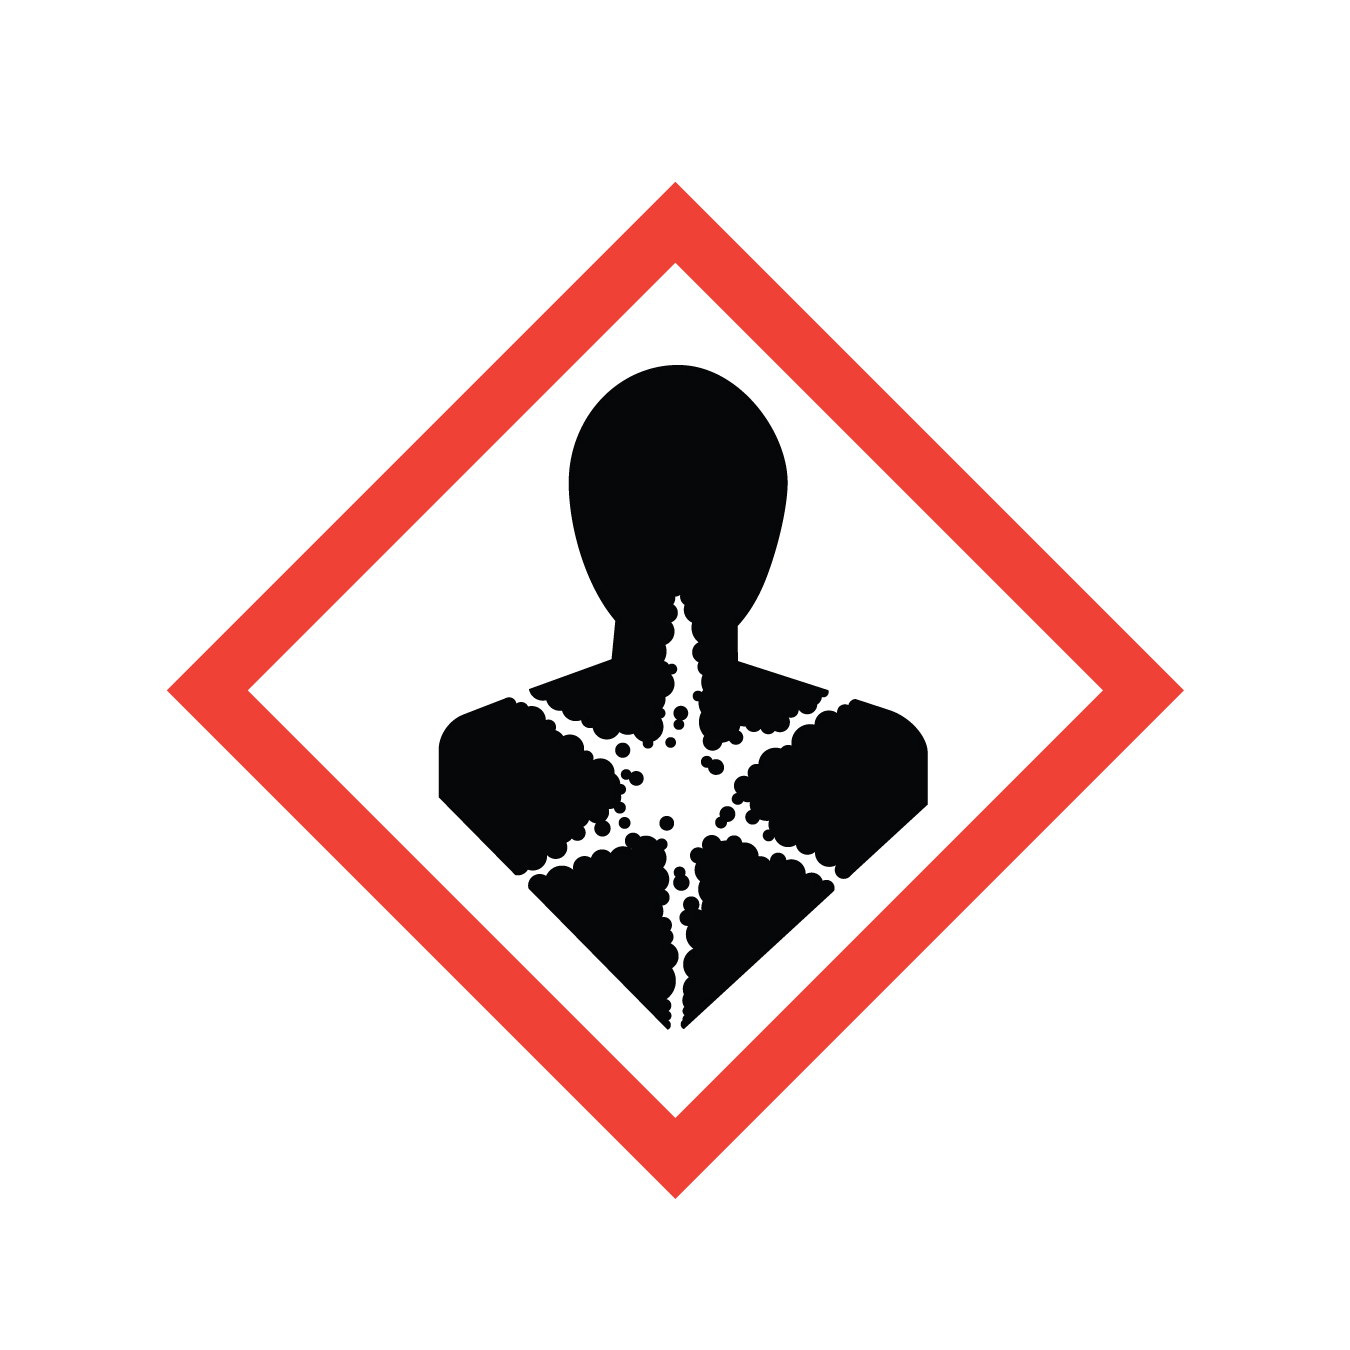 Compound Interest - A Guide to Chemical Hazard Symbols